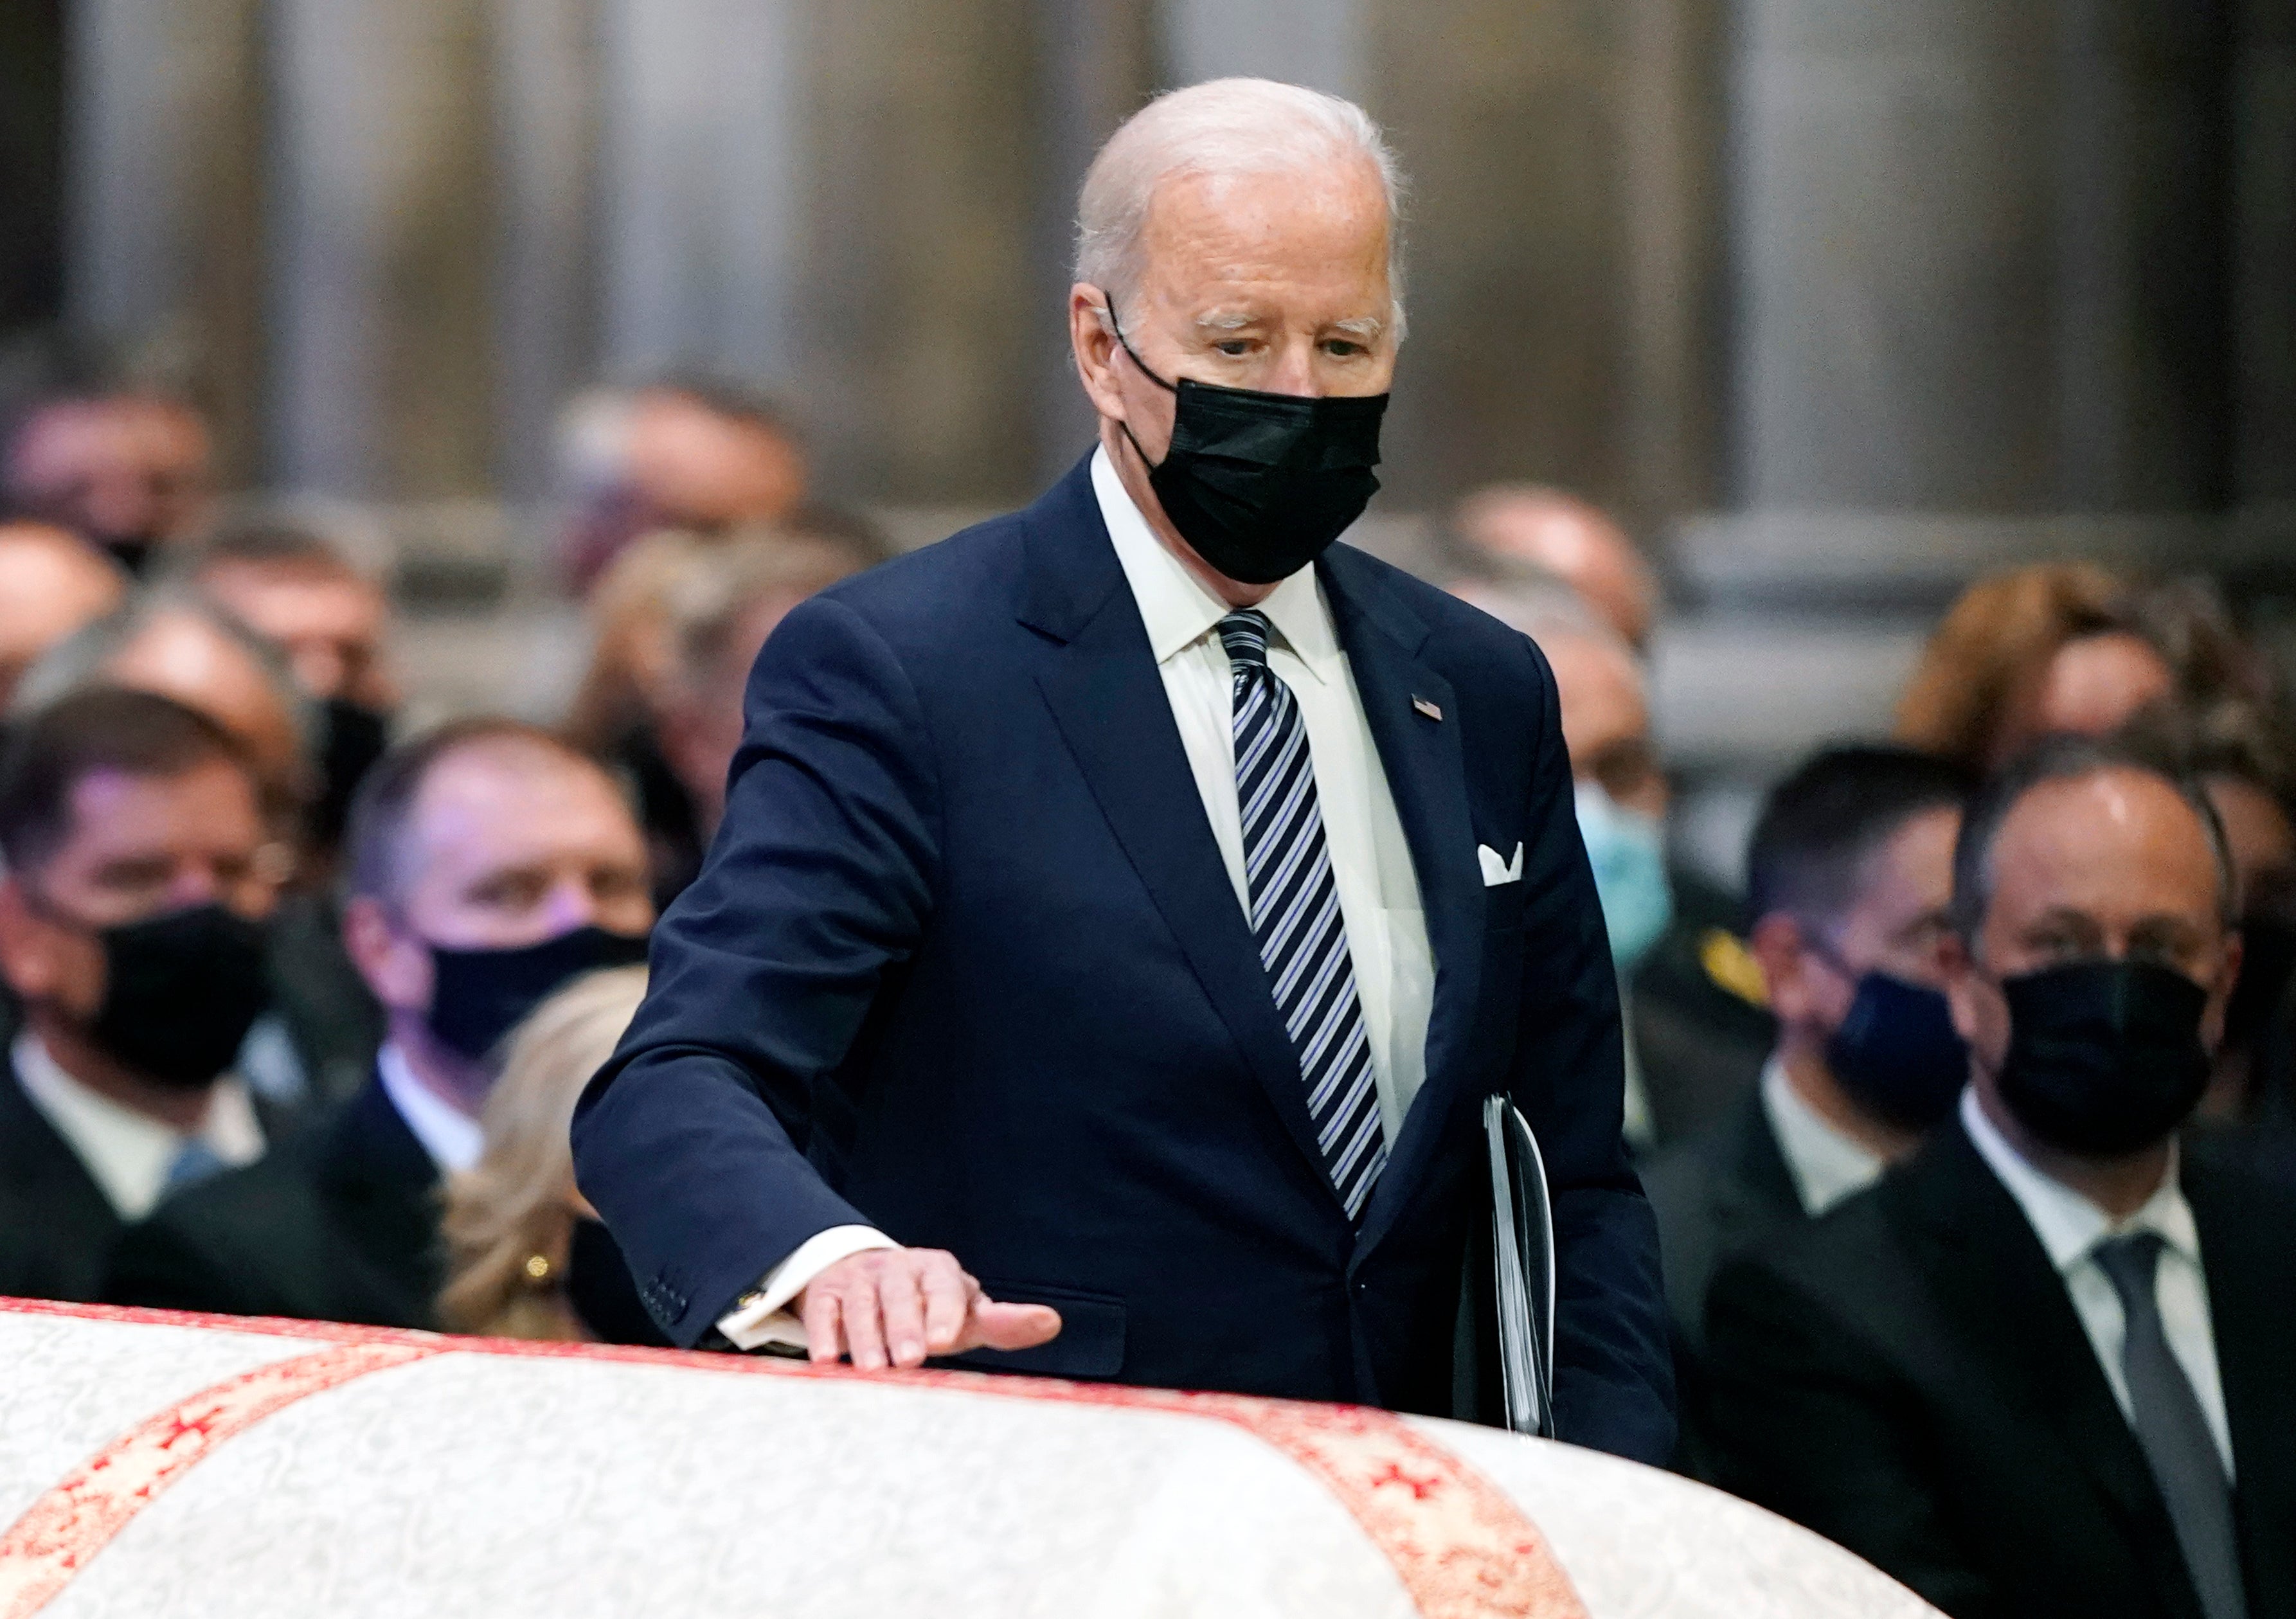 Biden at the funeral of Bob Dole this week